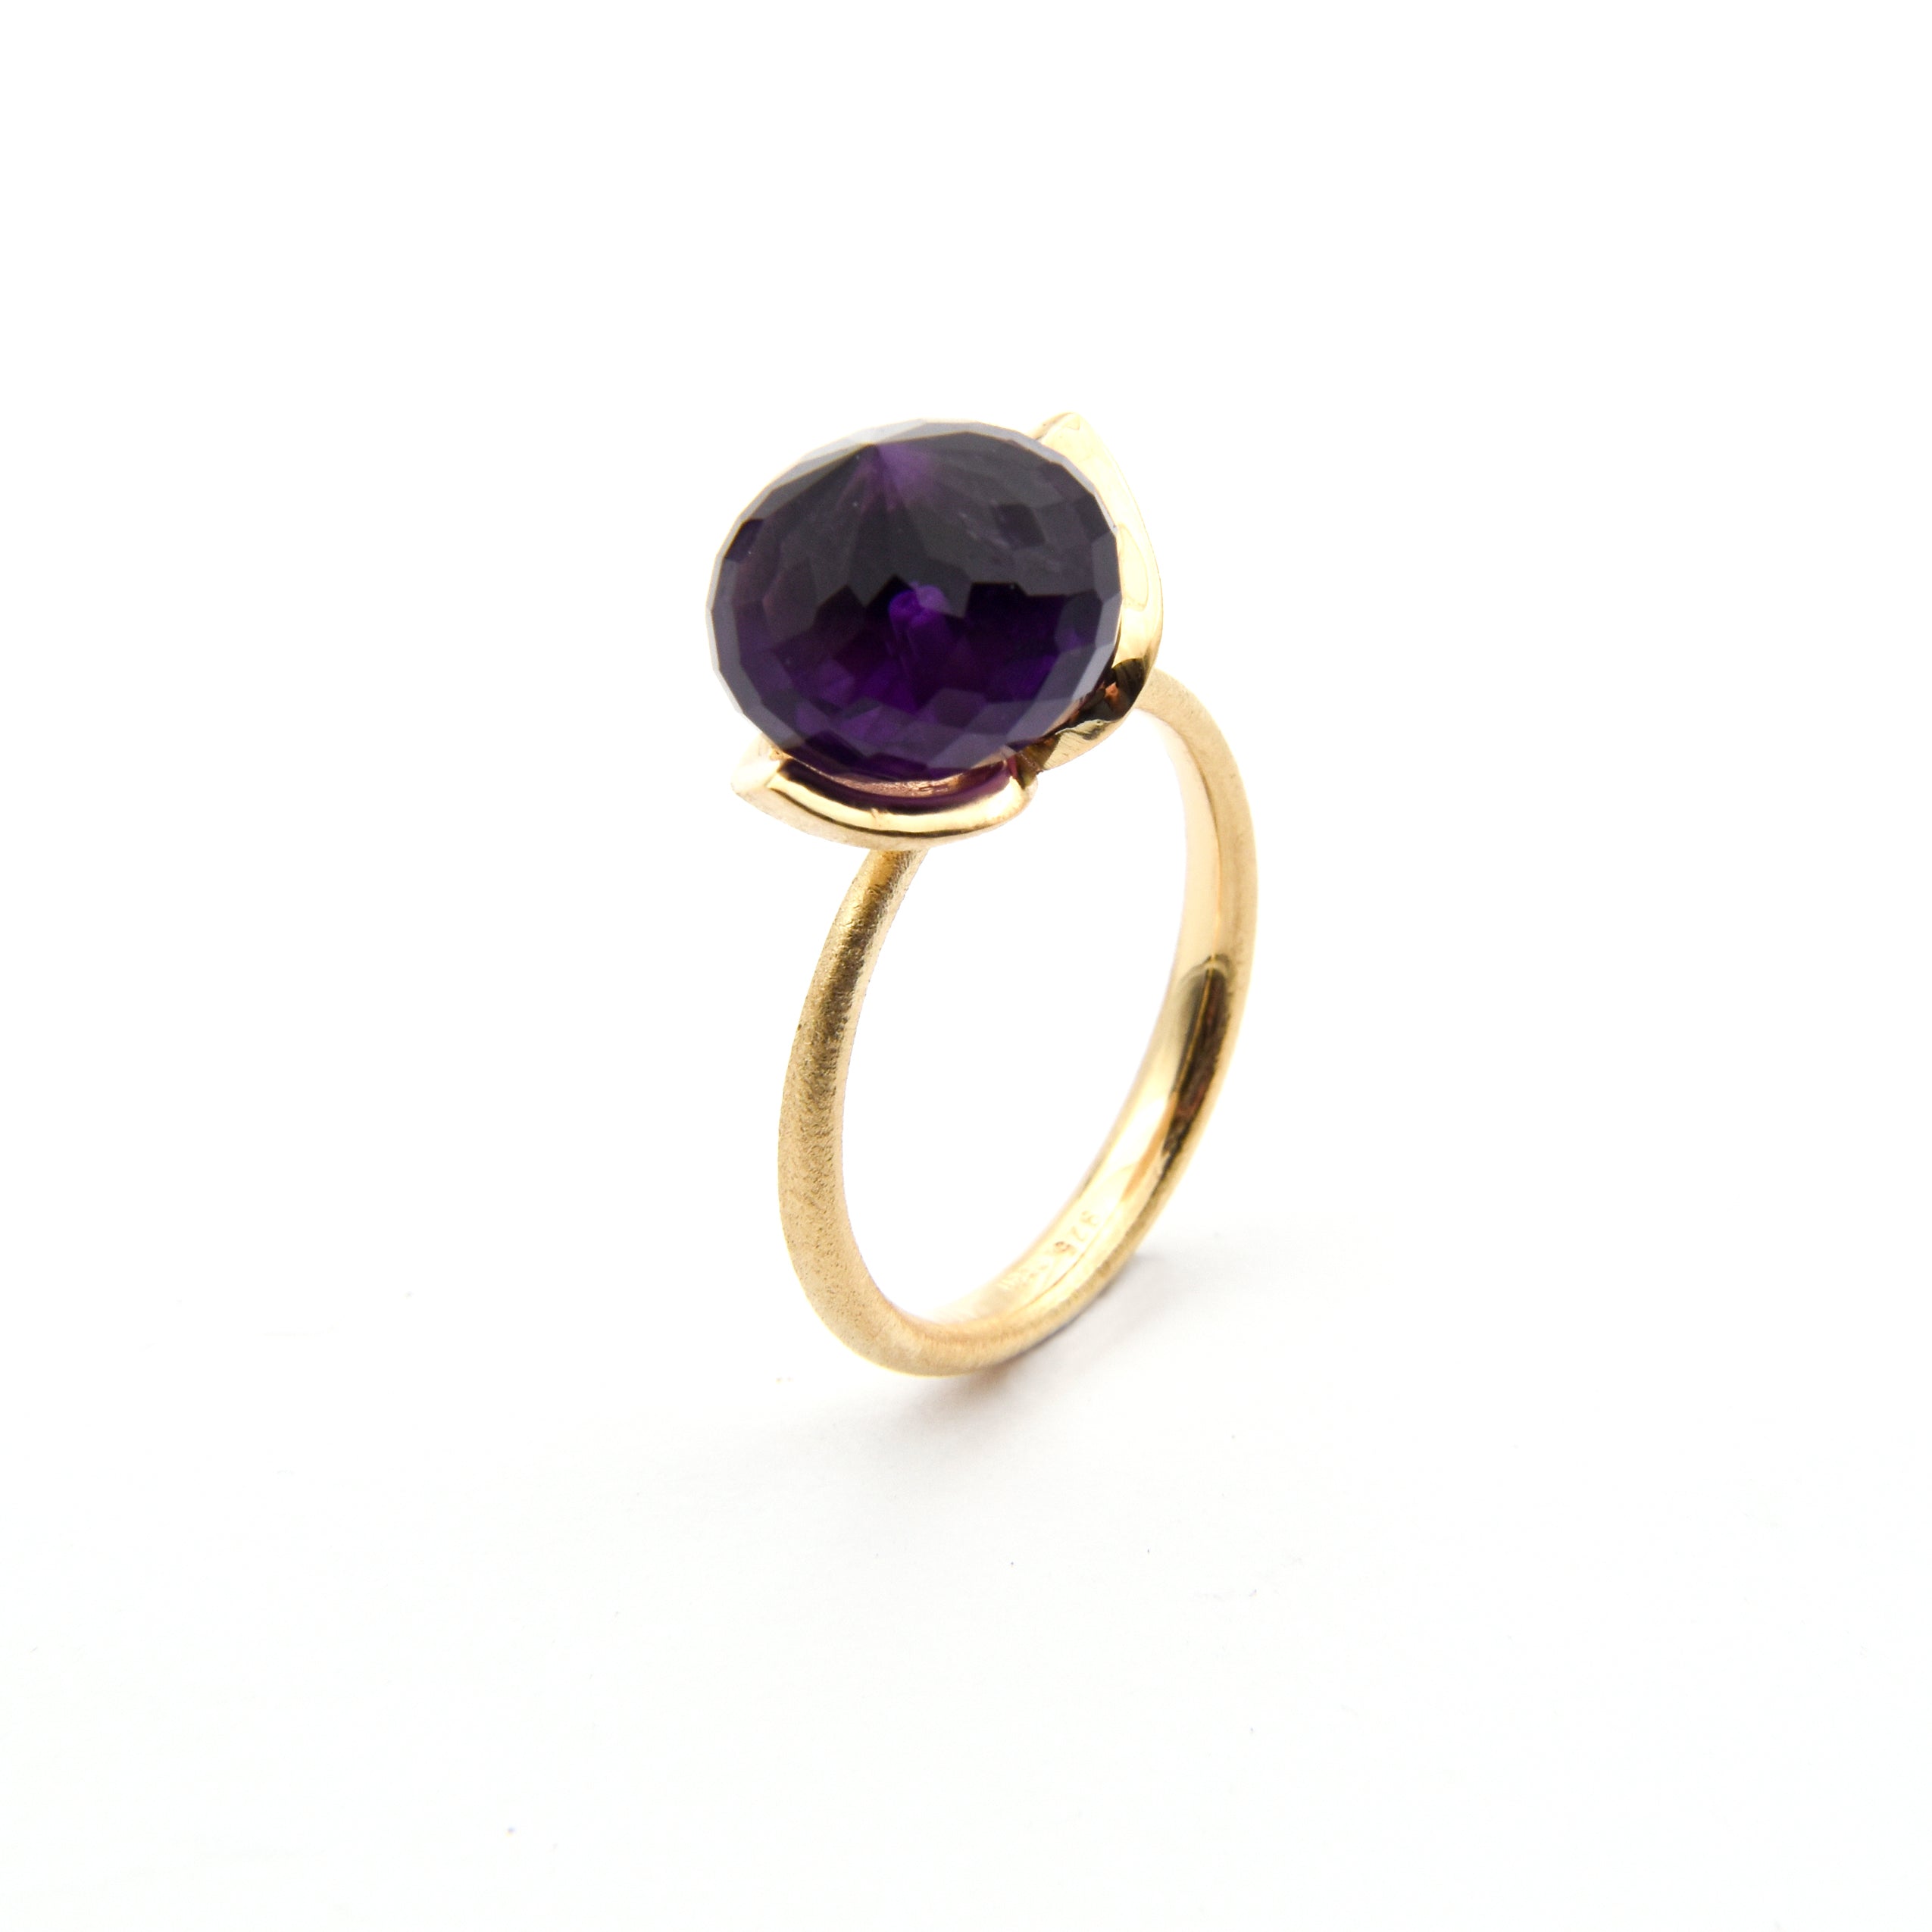 Dolce ring "medium" with amethyst 925/-